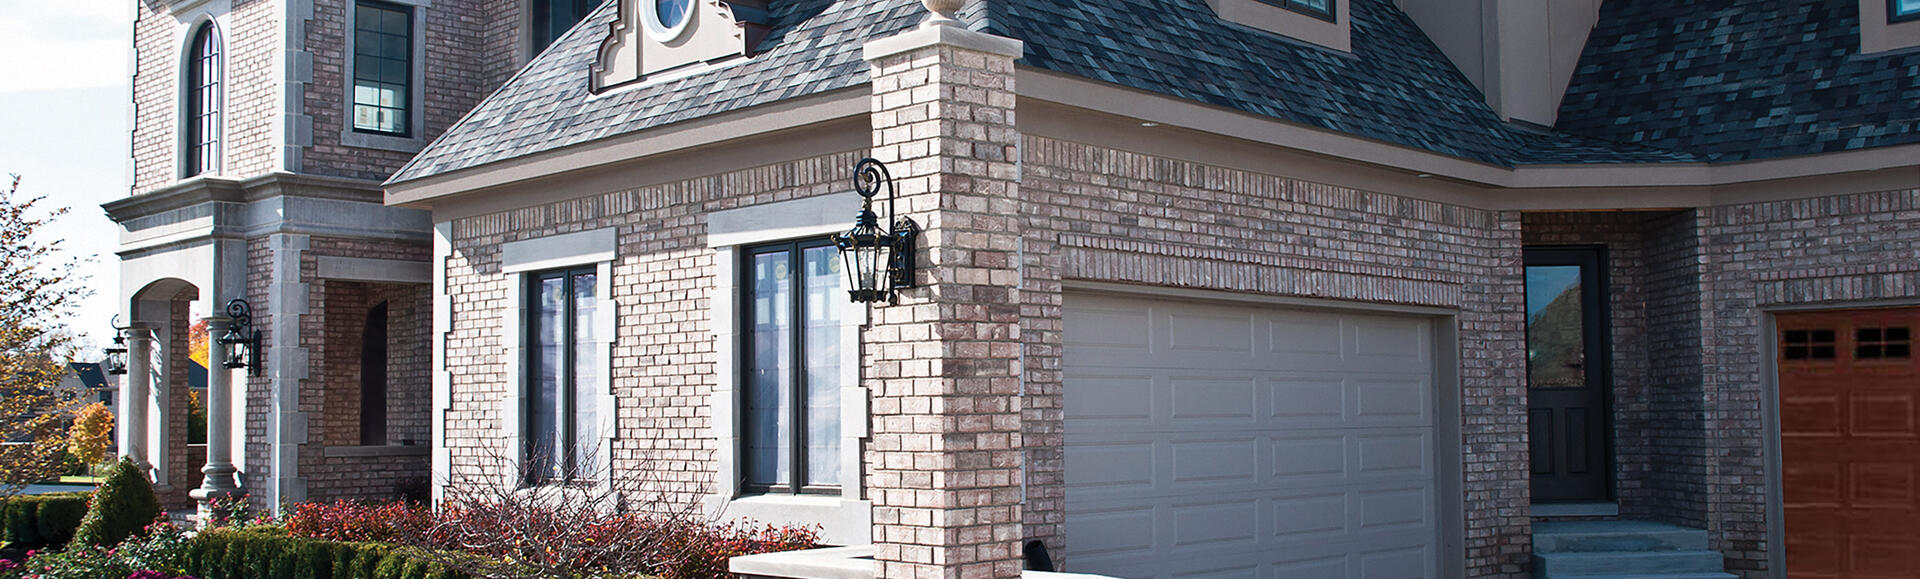 House using Crossroads Series products from Brampton Brick